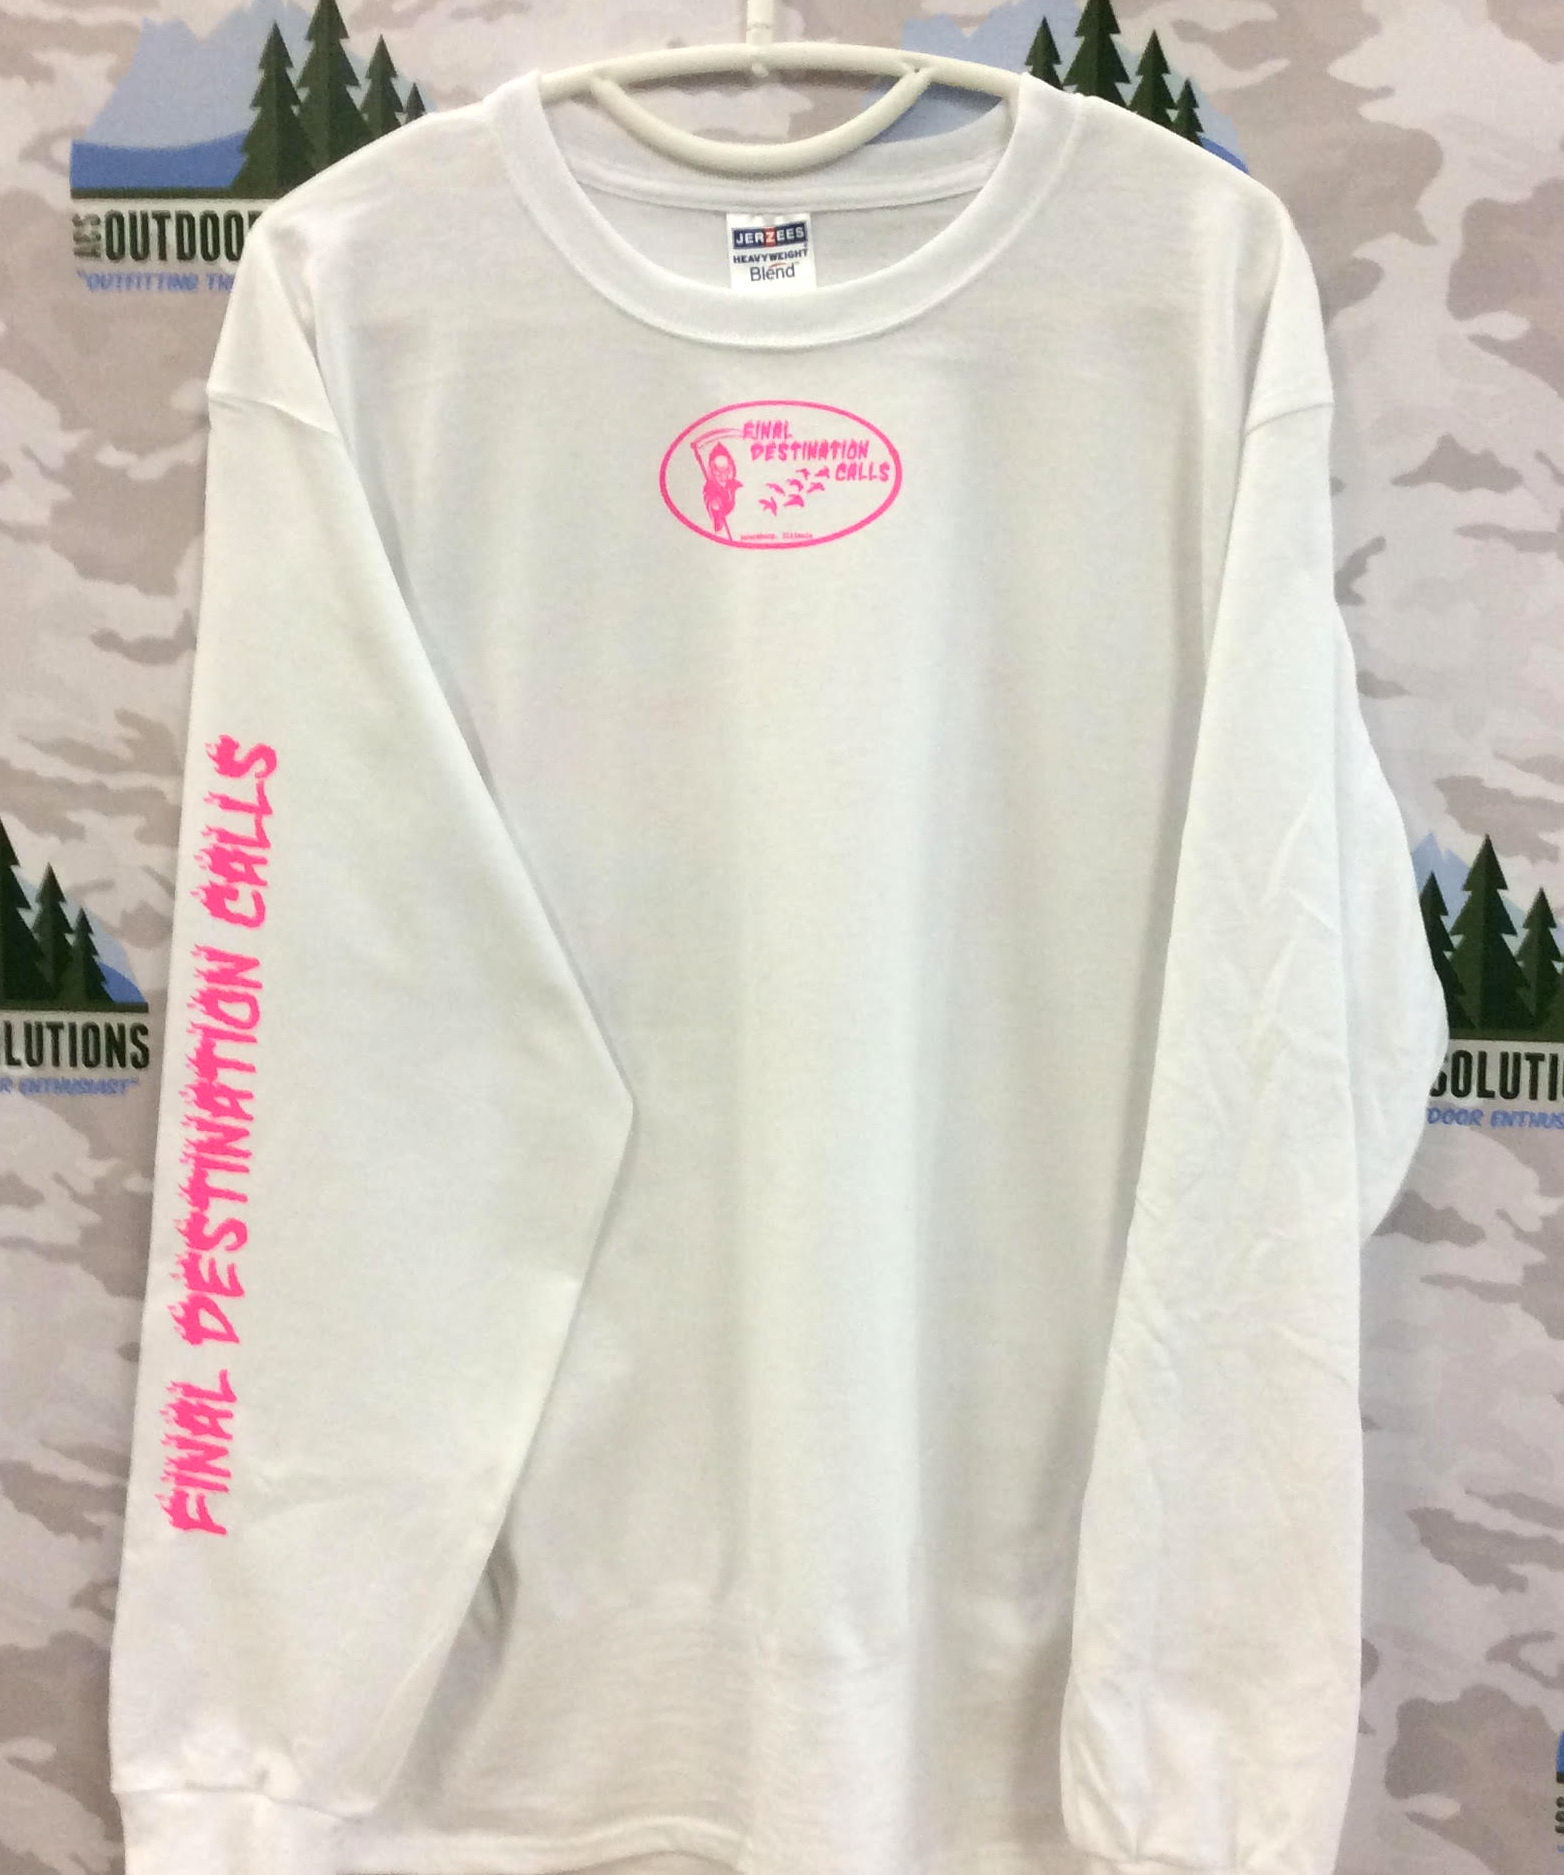 White Long Sleeve Tee with Hot Pink Logo from Final Destination Calls